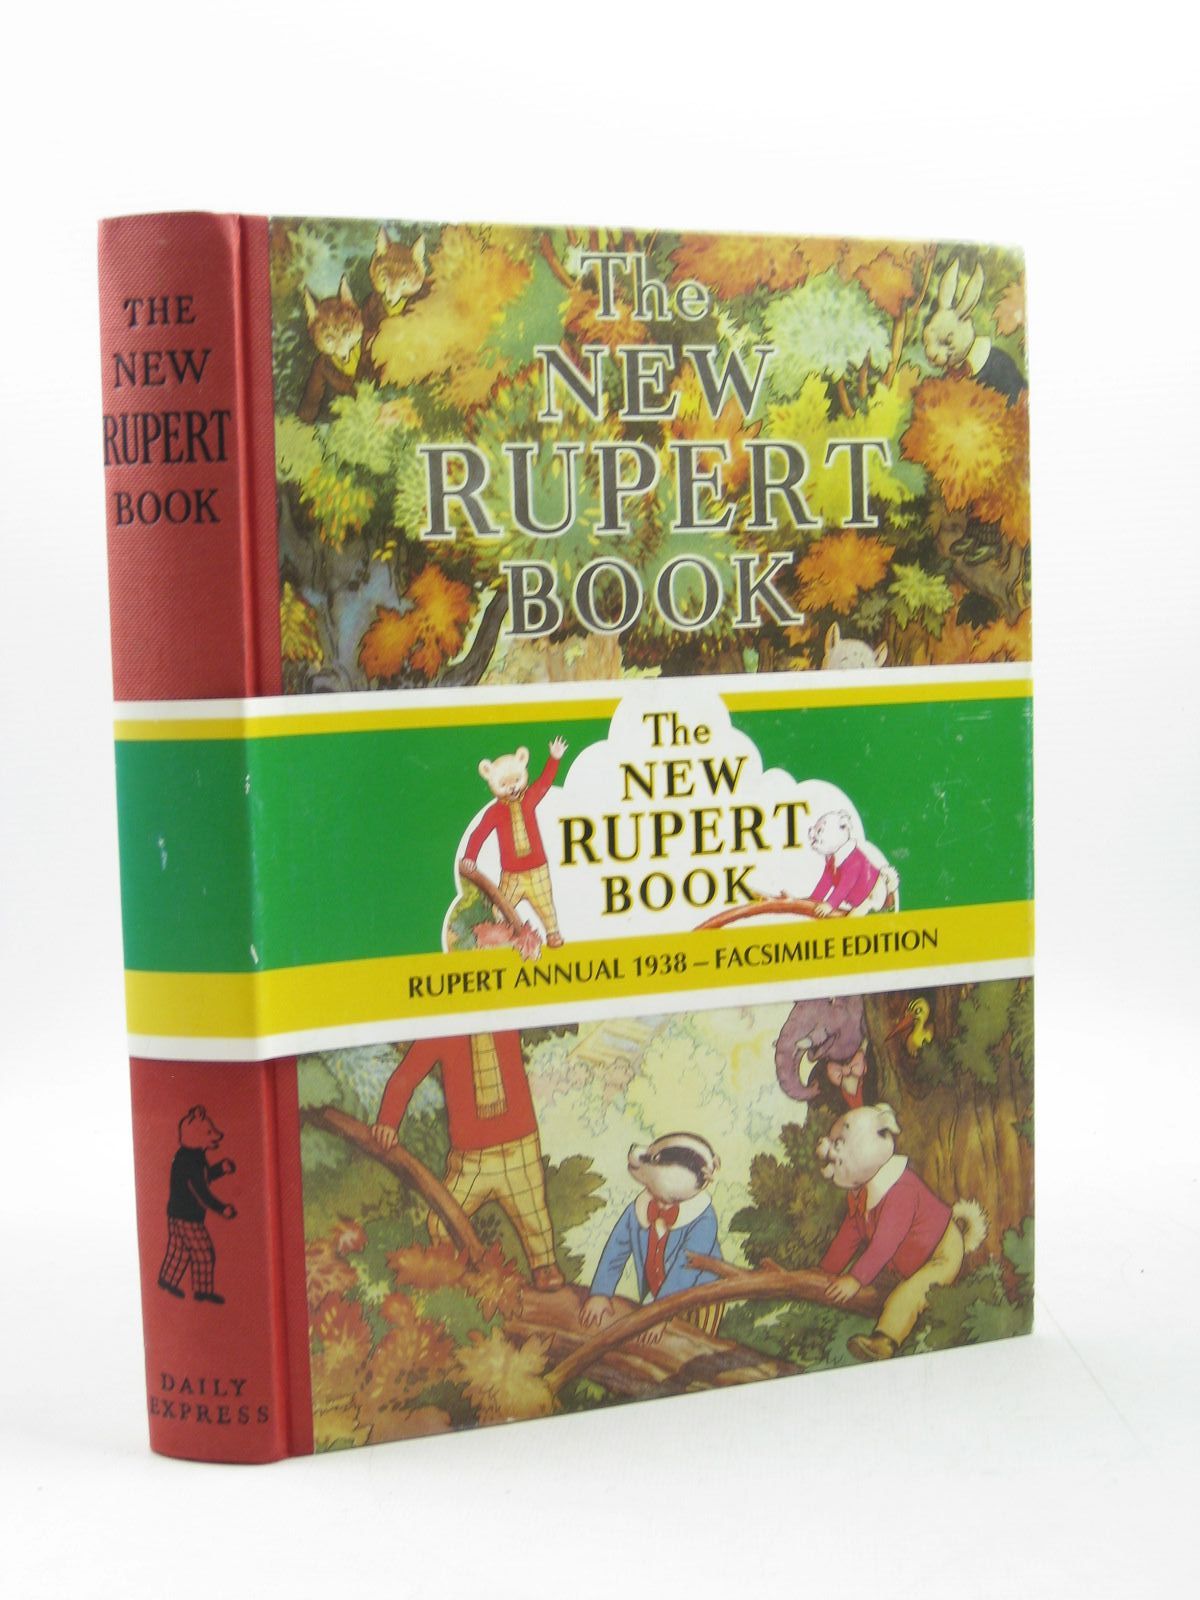 Photo of RUPERT ANNUAL 1938 (FACSIMILE) - THE NEW RUPERT BOOK written by Bestall, Alfred illustrated by Bestall, Alfred published by Daily Express (STOCK CODE: 1402893)  for sale by Stella & Rose's Books